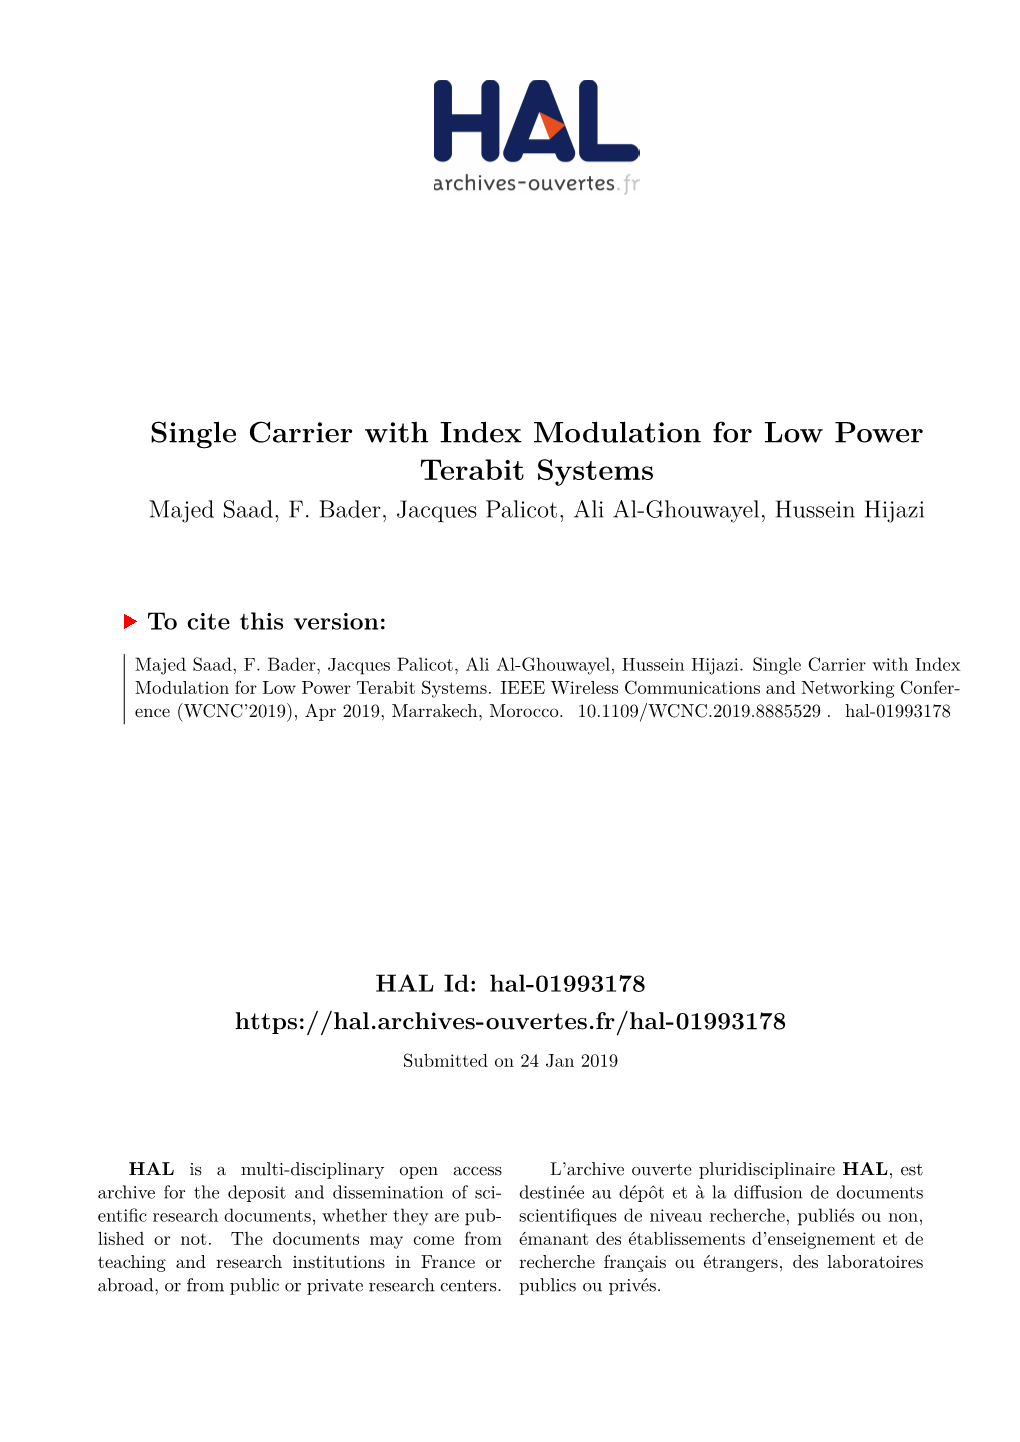 Single Carrier with Index Modulation for Low Power Terabit Systems Majed Saad, F